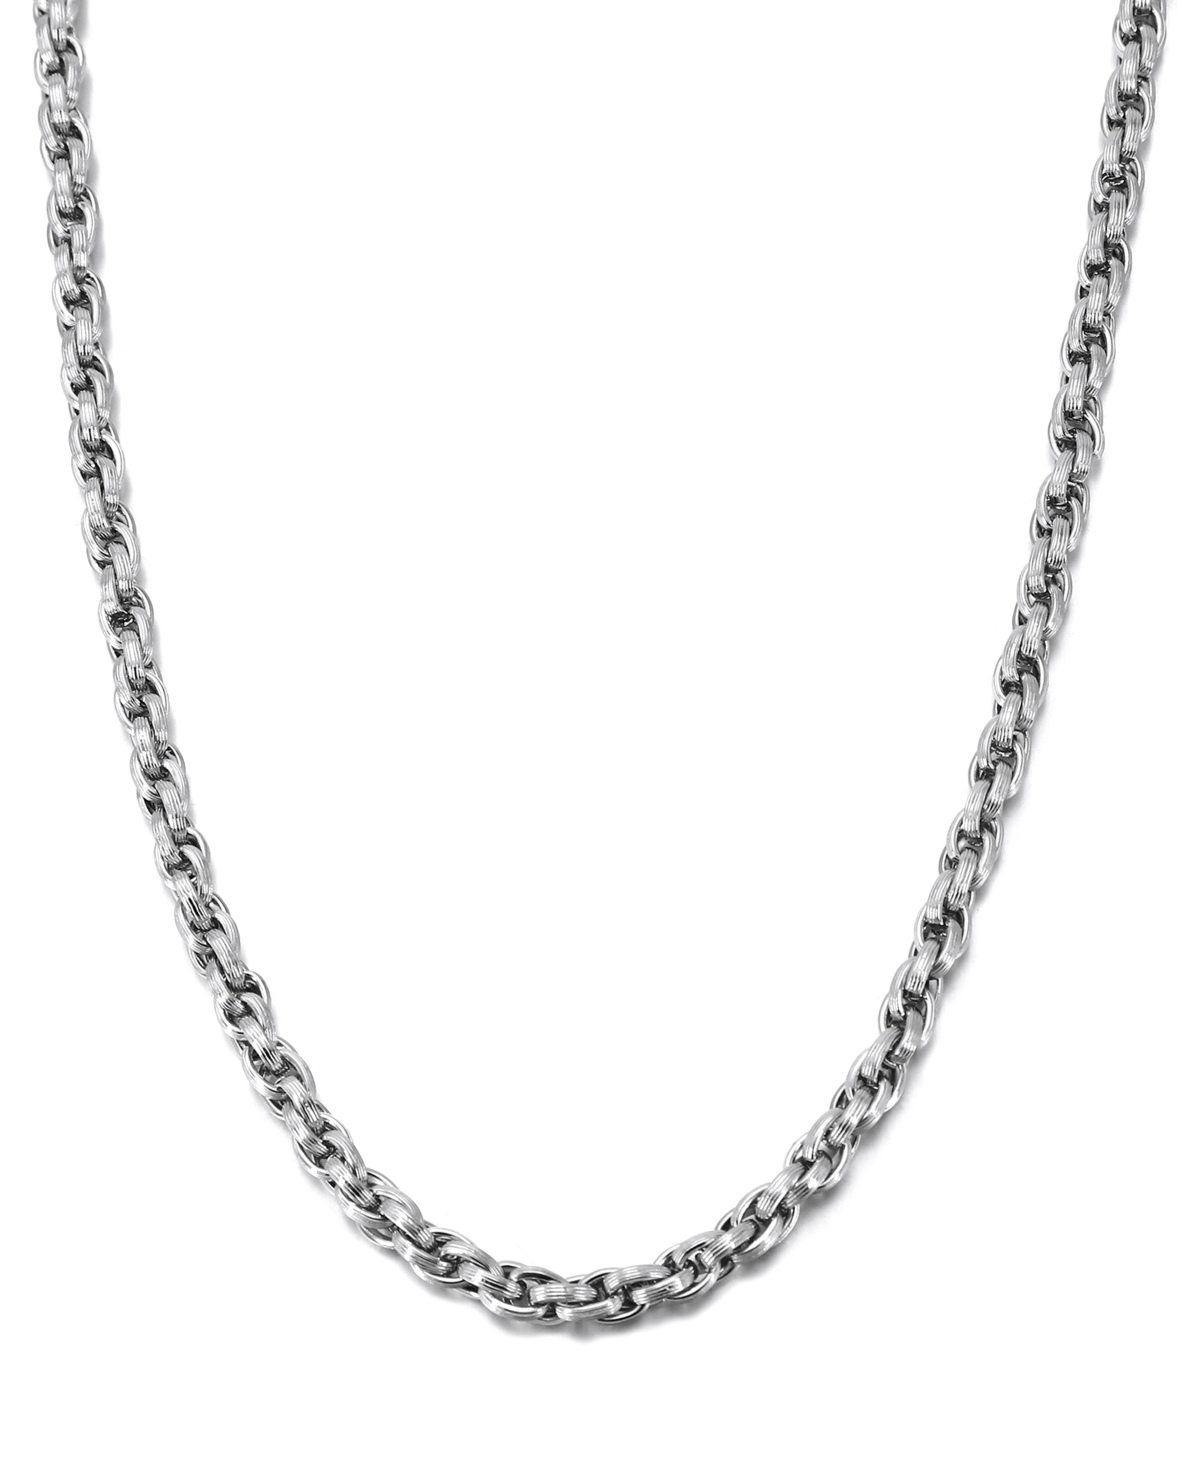 Esquire Men's Jewelry Triple Woven Link 22" Chain Necklace, Created for Macy's